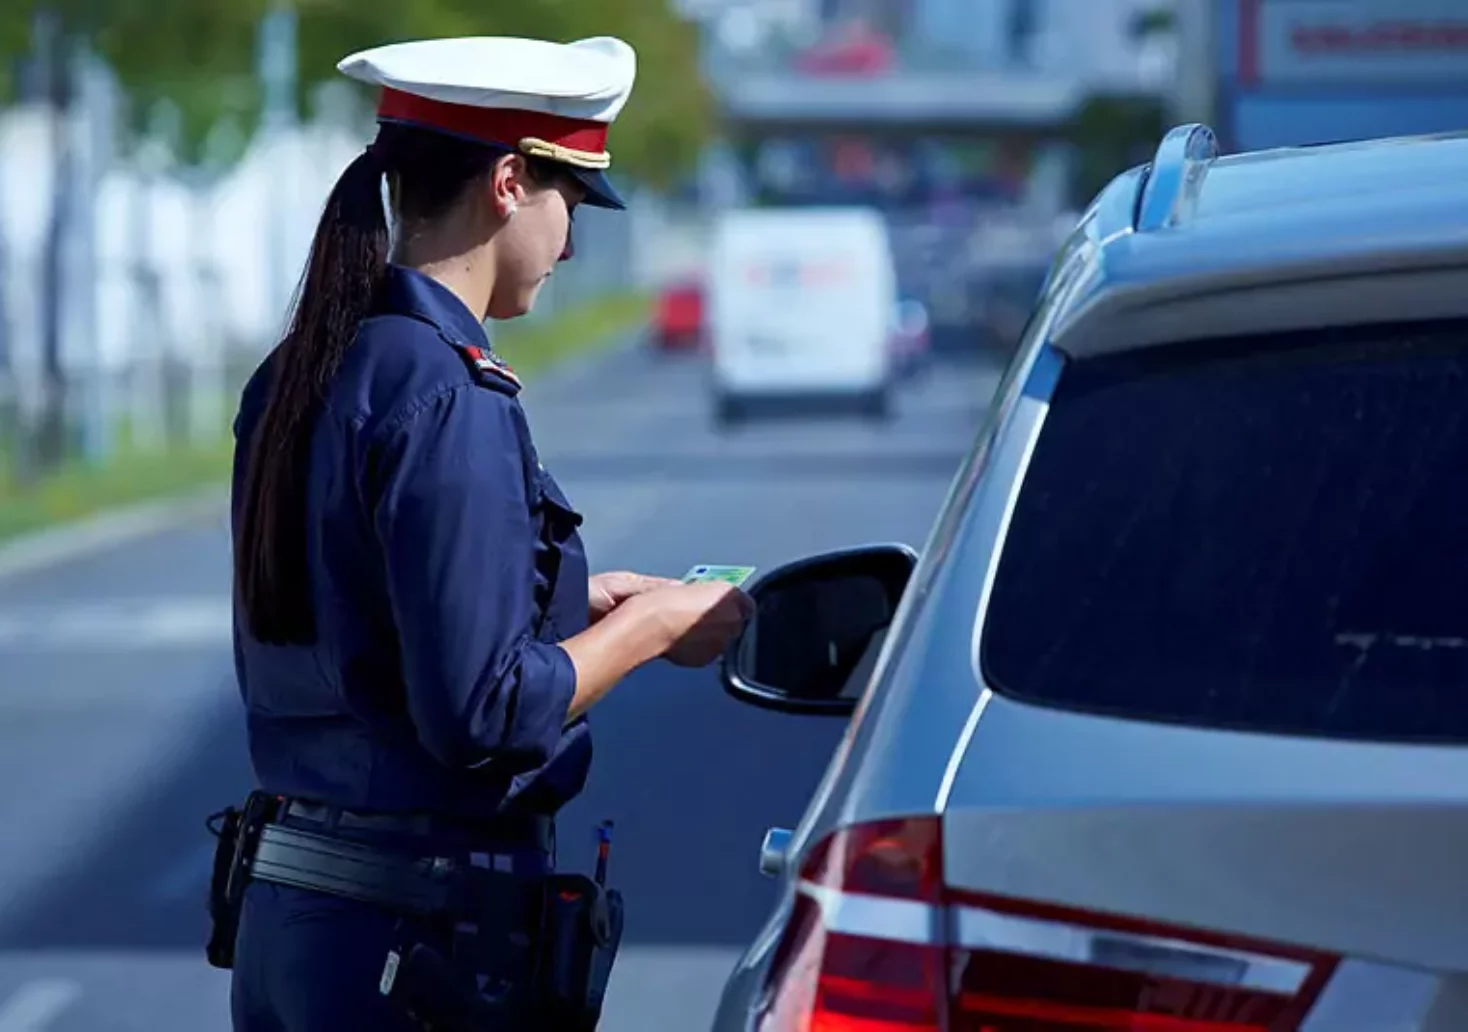 A photo on the 5min.at website shows a policewoman during a traffic stop.  She holds the driver's license in her hands.  There is a car in front of her.